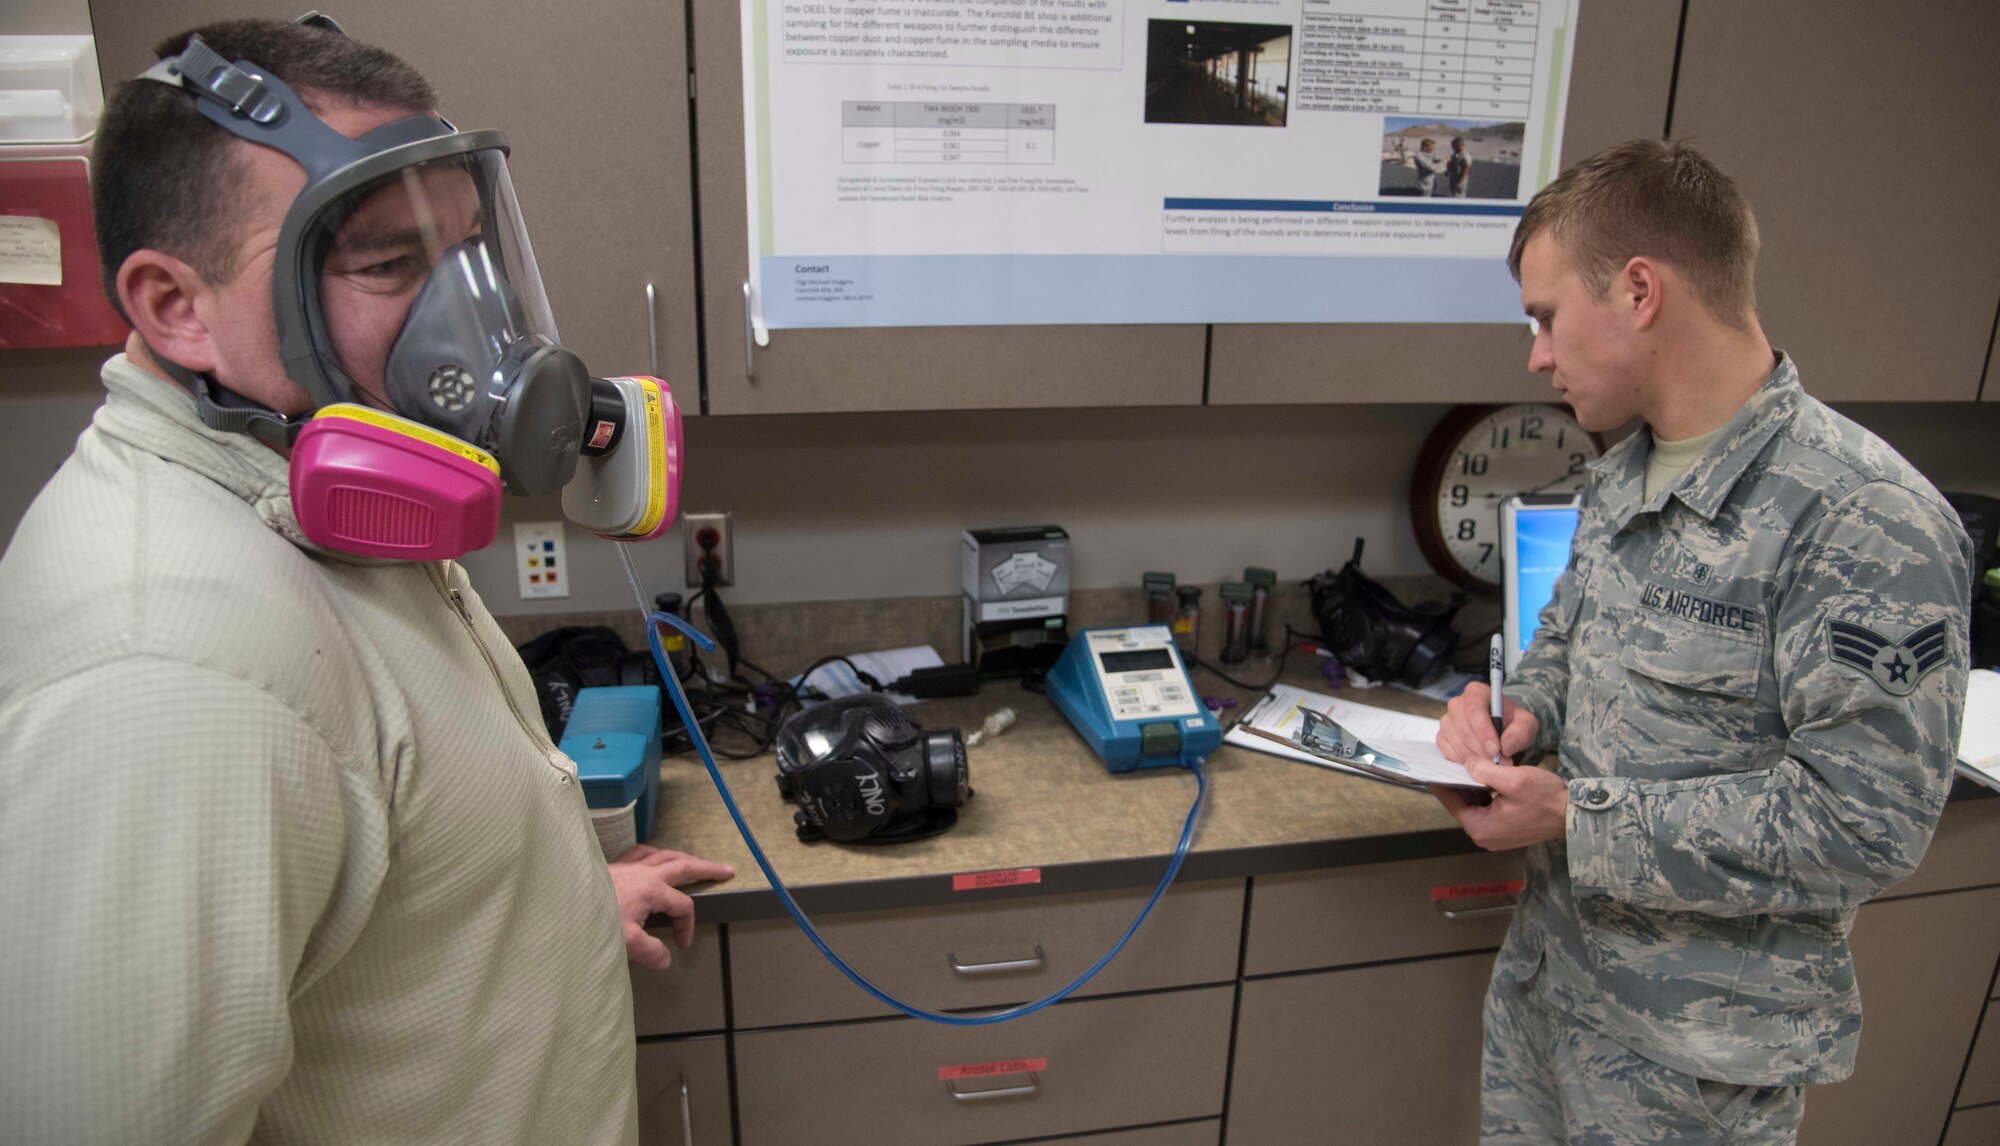 Senior Airman Ants Vahk (right), 92nd Aerospace Medicine Squadron bioenvironmental engineering journeyman performs a respirator fit test for Staff Sgt. Nathan Gilbert (left), 141st Maintenance Squadron metals technician, Dec. 7, 2016 at Fairchild Air Force Base, Washington. The test is performed by hooking up a respirator to a machine called a Porta Count. One hose connects to the mask and takes account for the atmosphere within the mask, while a second hose takes in a sample from the surrounding environment that is outside the mask. The machines performs a calculation based on how many particles are outside the mask versus how many are leaking inside the mask and determines if the mask is being effective. (U.S. Air Force photo/Senior Airman Nick J. Daniello)